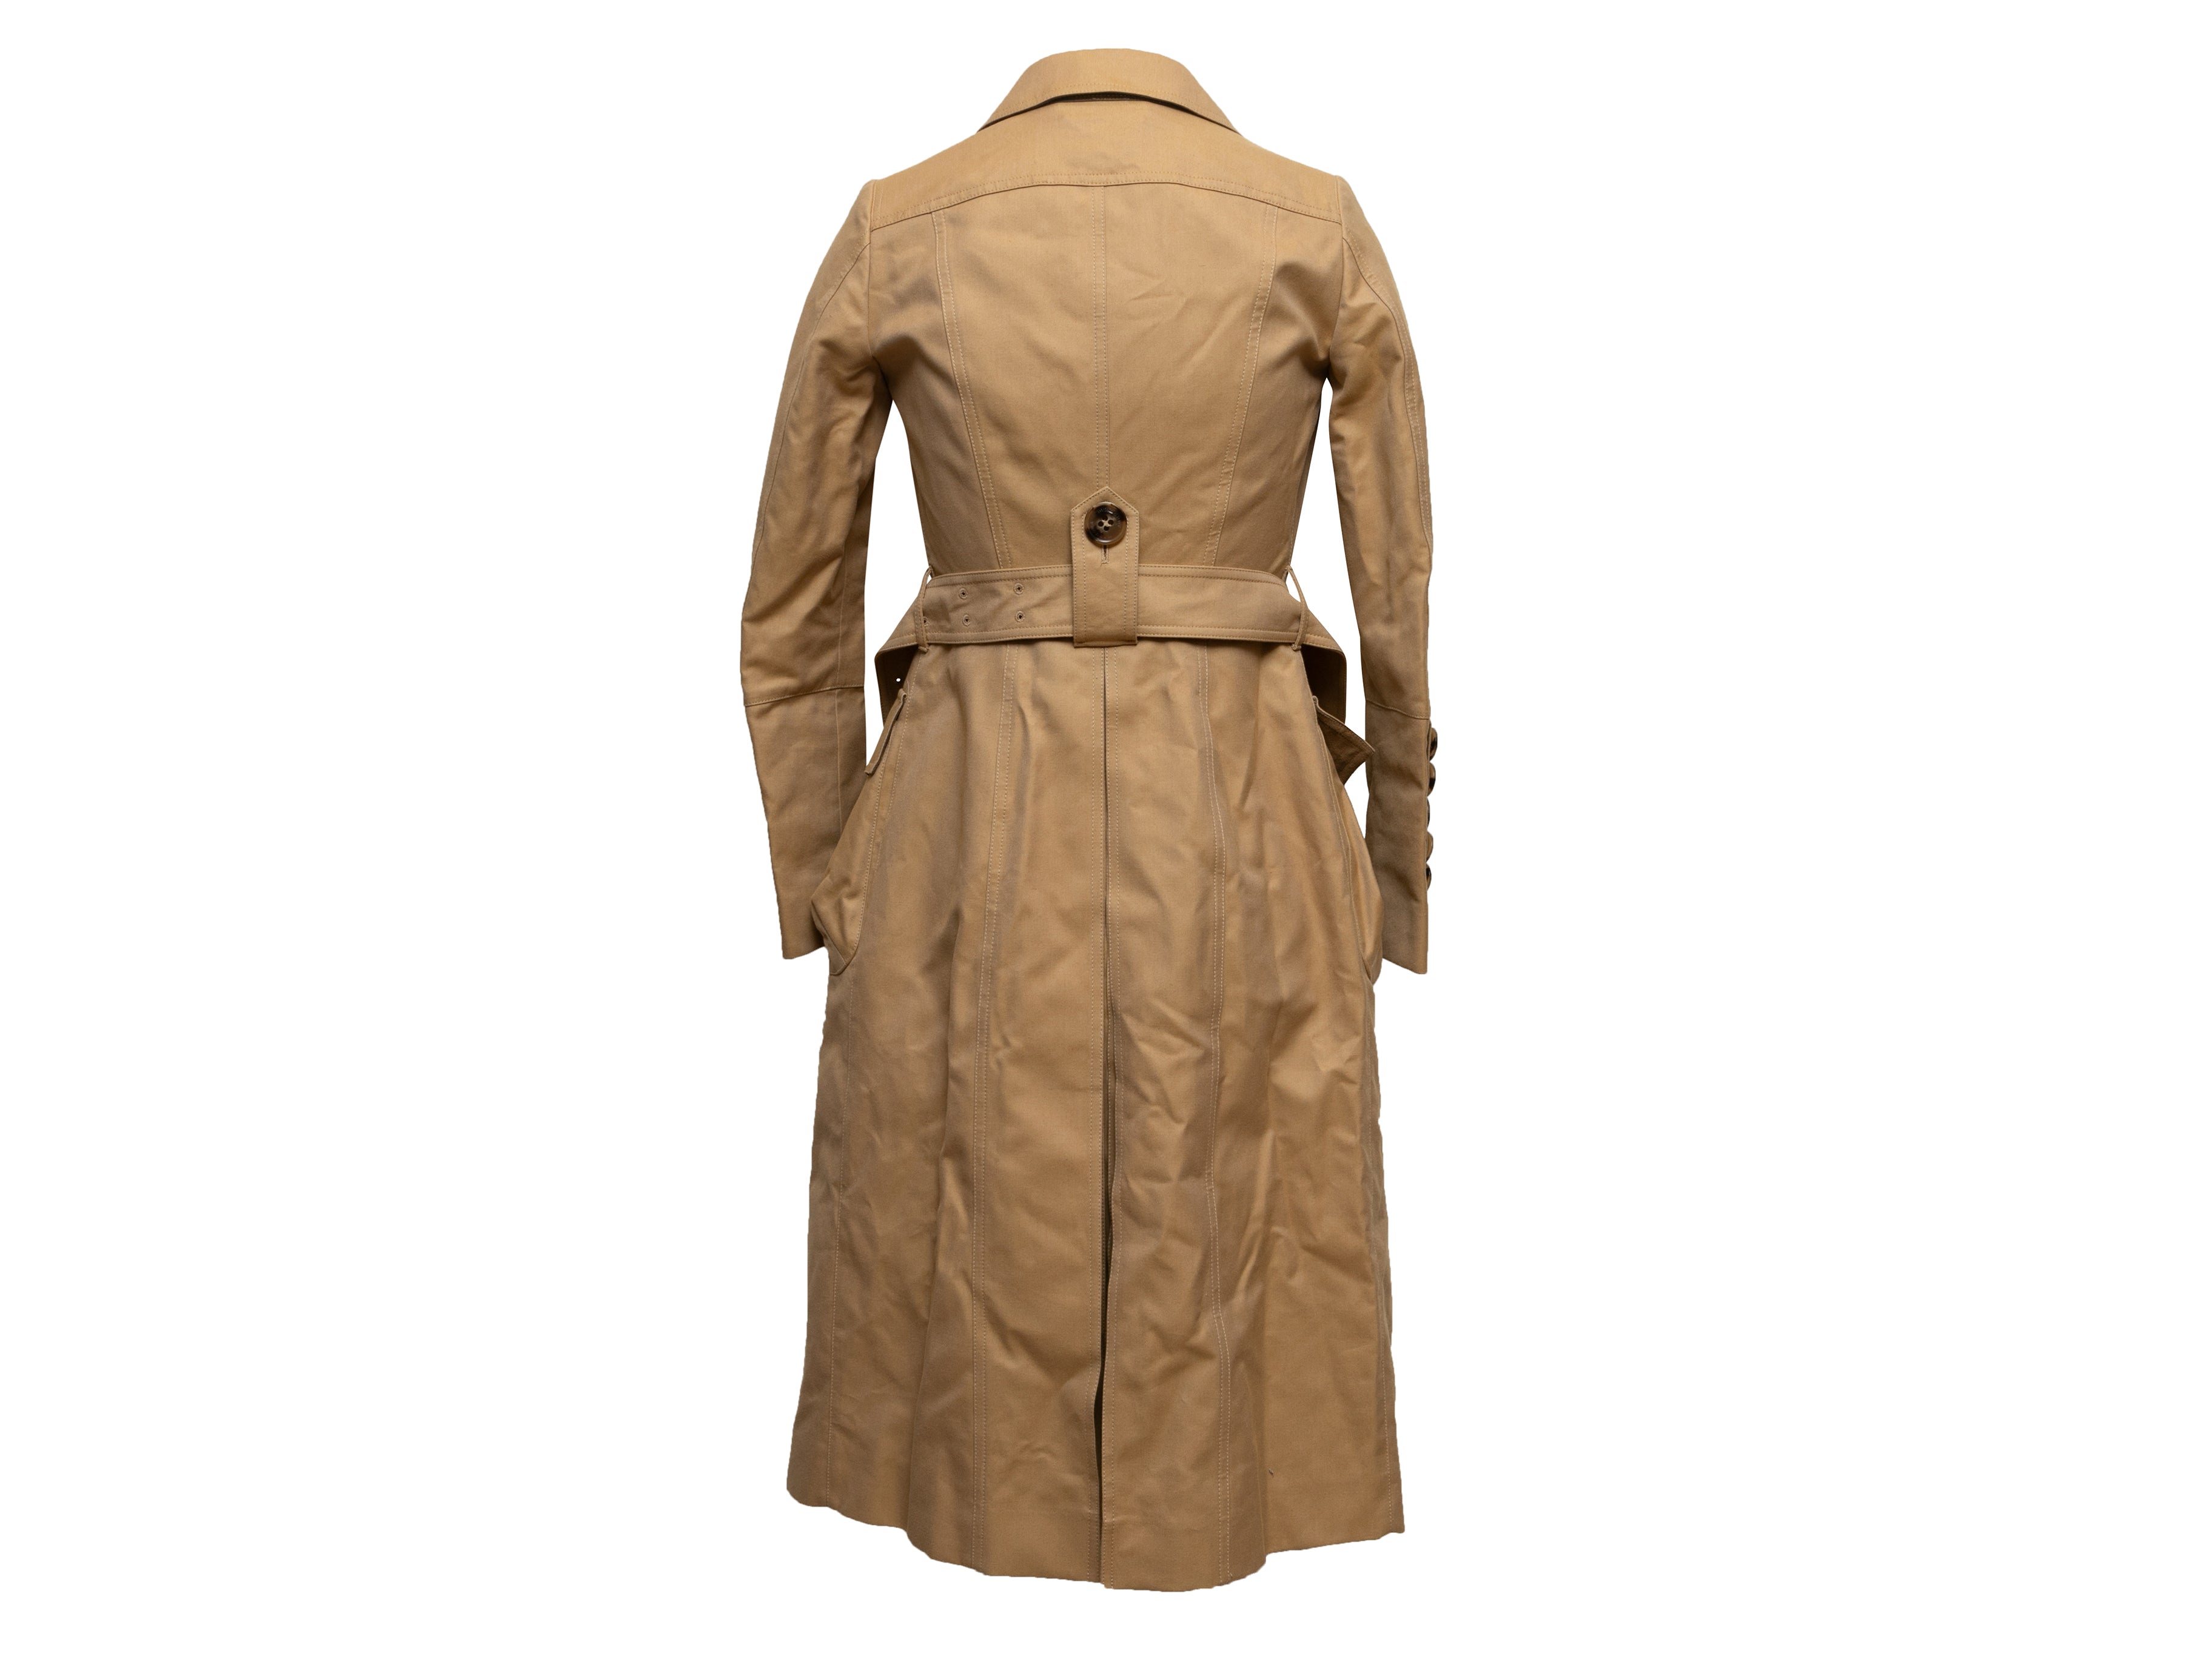 Tan Belted Trench Coat Size EU 34